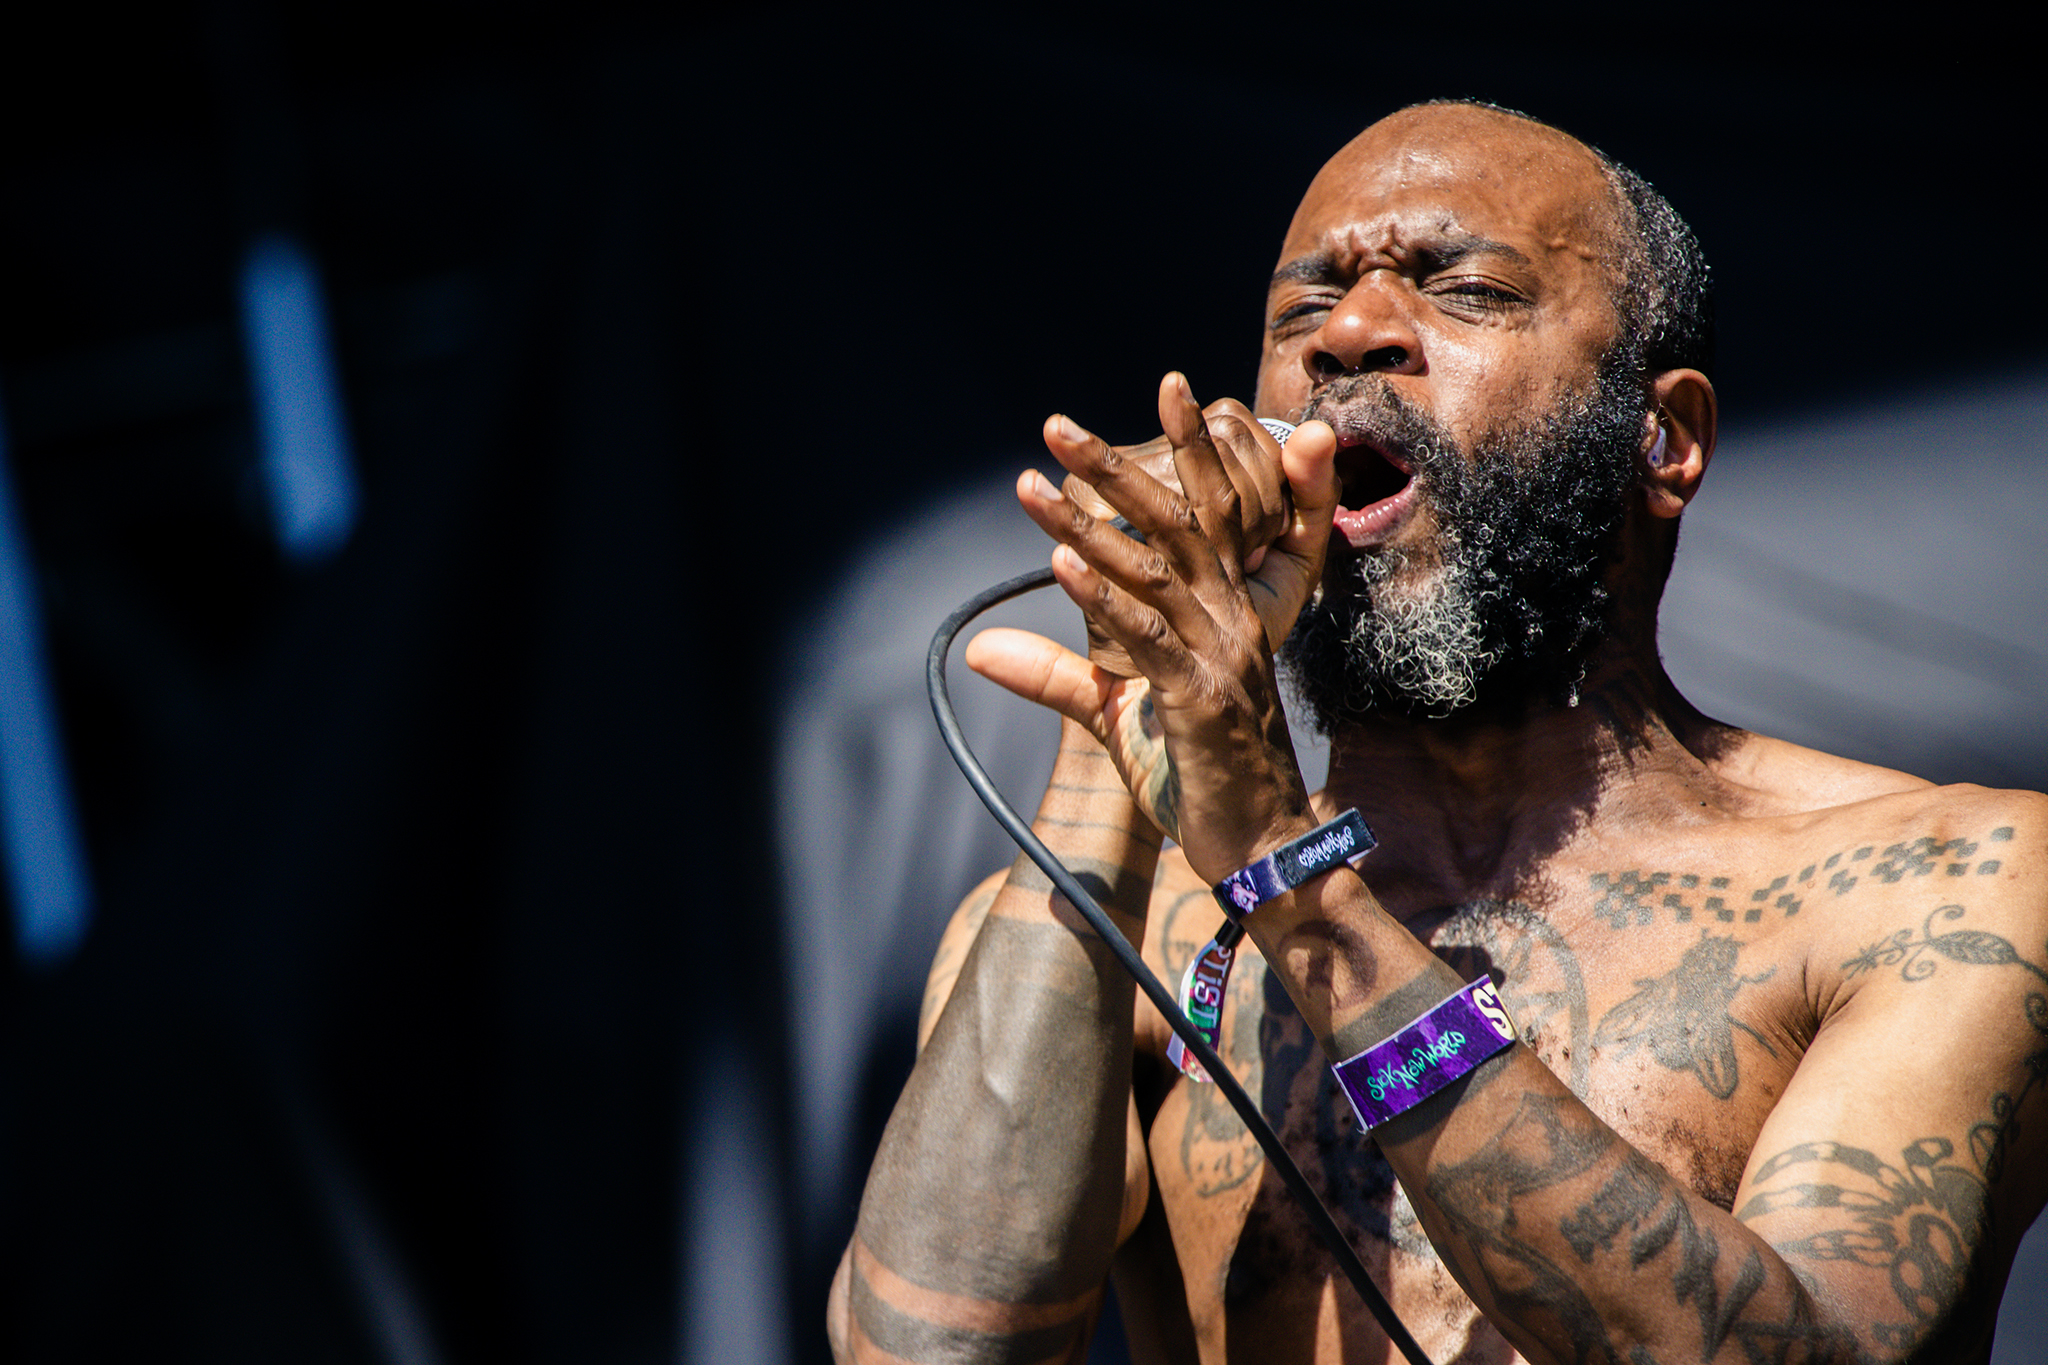 Stefan Burnett aka MC Ride of Death Grips performs on stage at SWG3 News  Photo  Getty Images